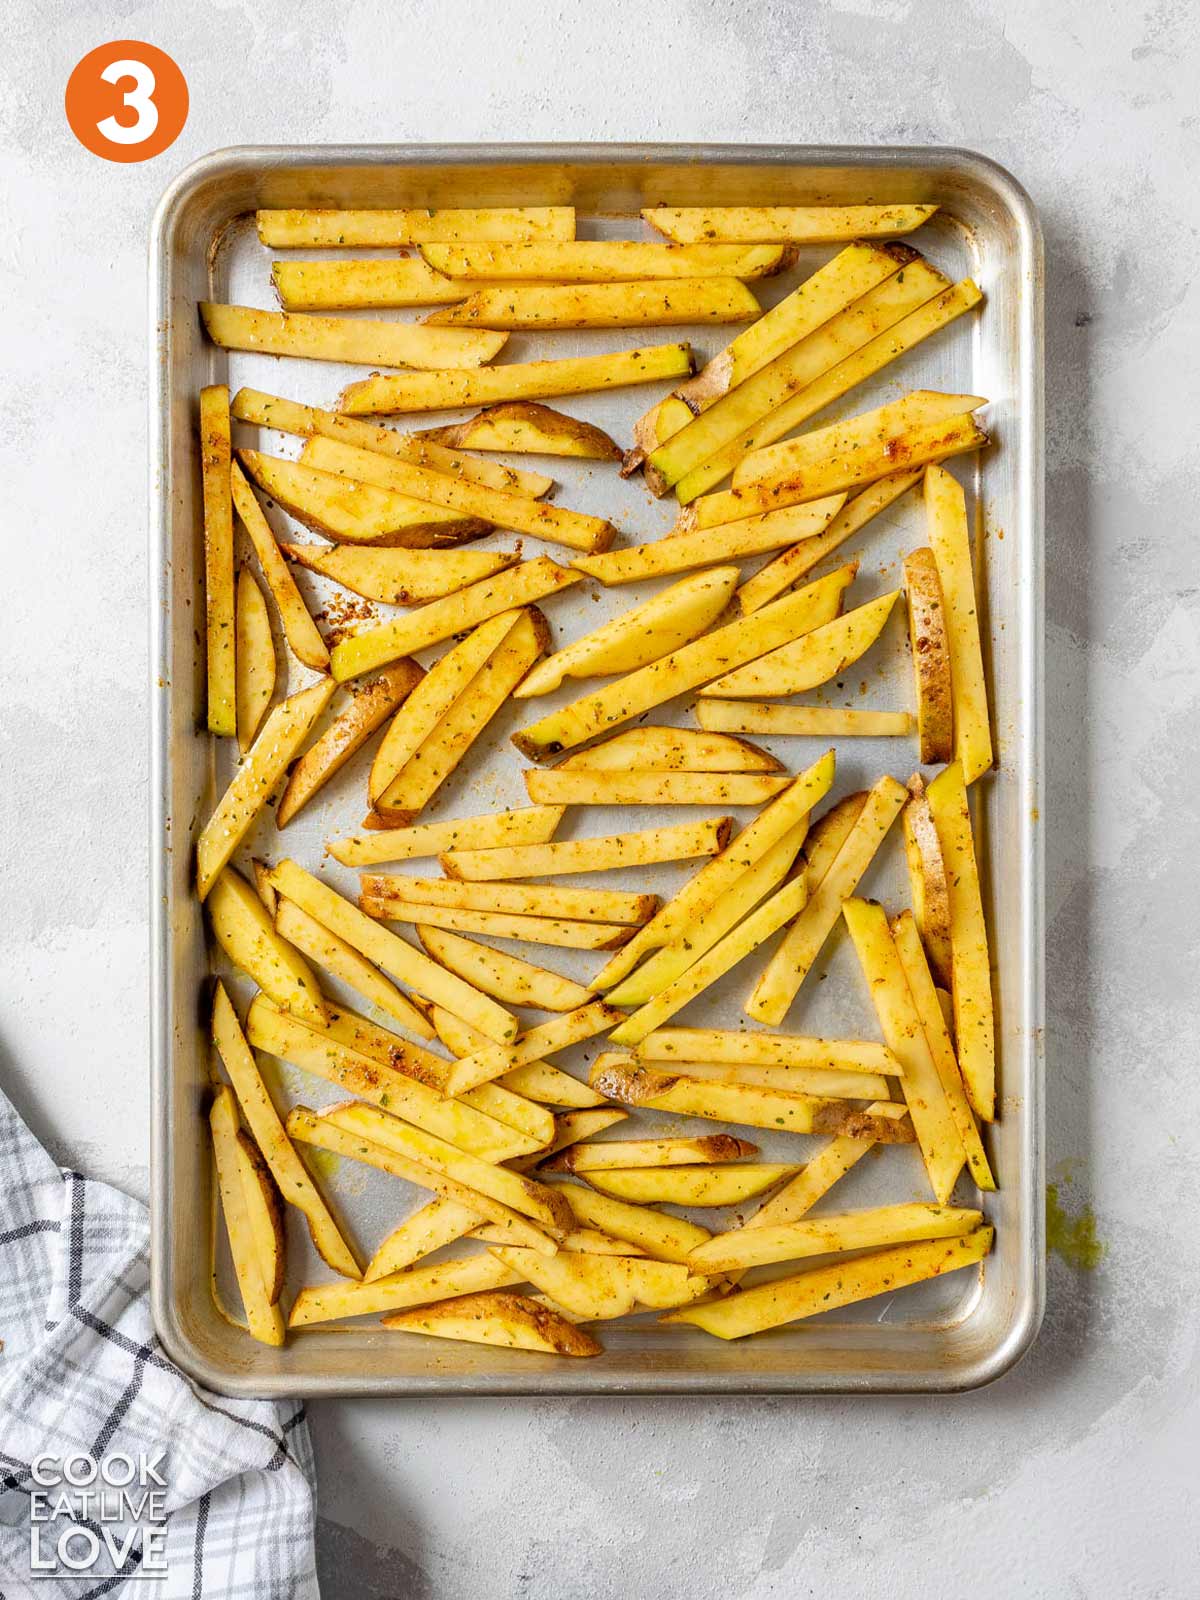 Potato strips spread out on a baking tray to make oven fries.